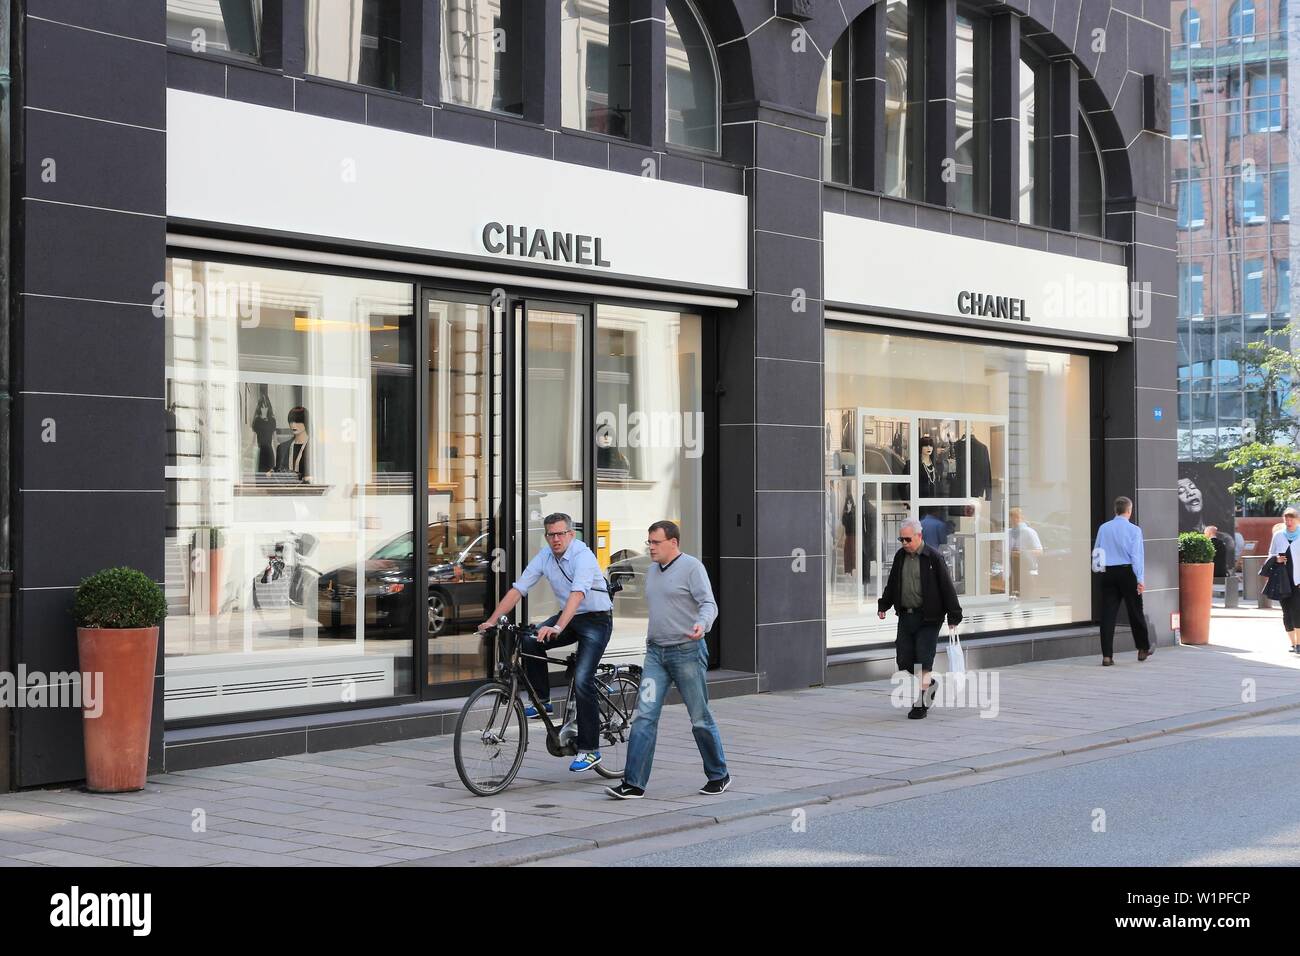 HAMBURG, GERMANY - AUGUST 28, 2014: Chanel fashion shop in Hamburg. The  famous brand exists since 1909 Stock Photo - Alamy